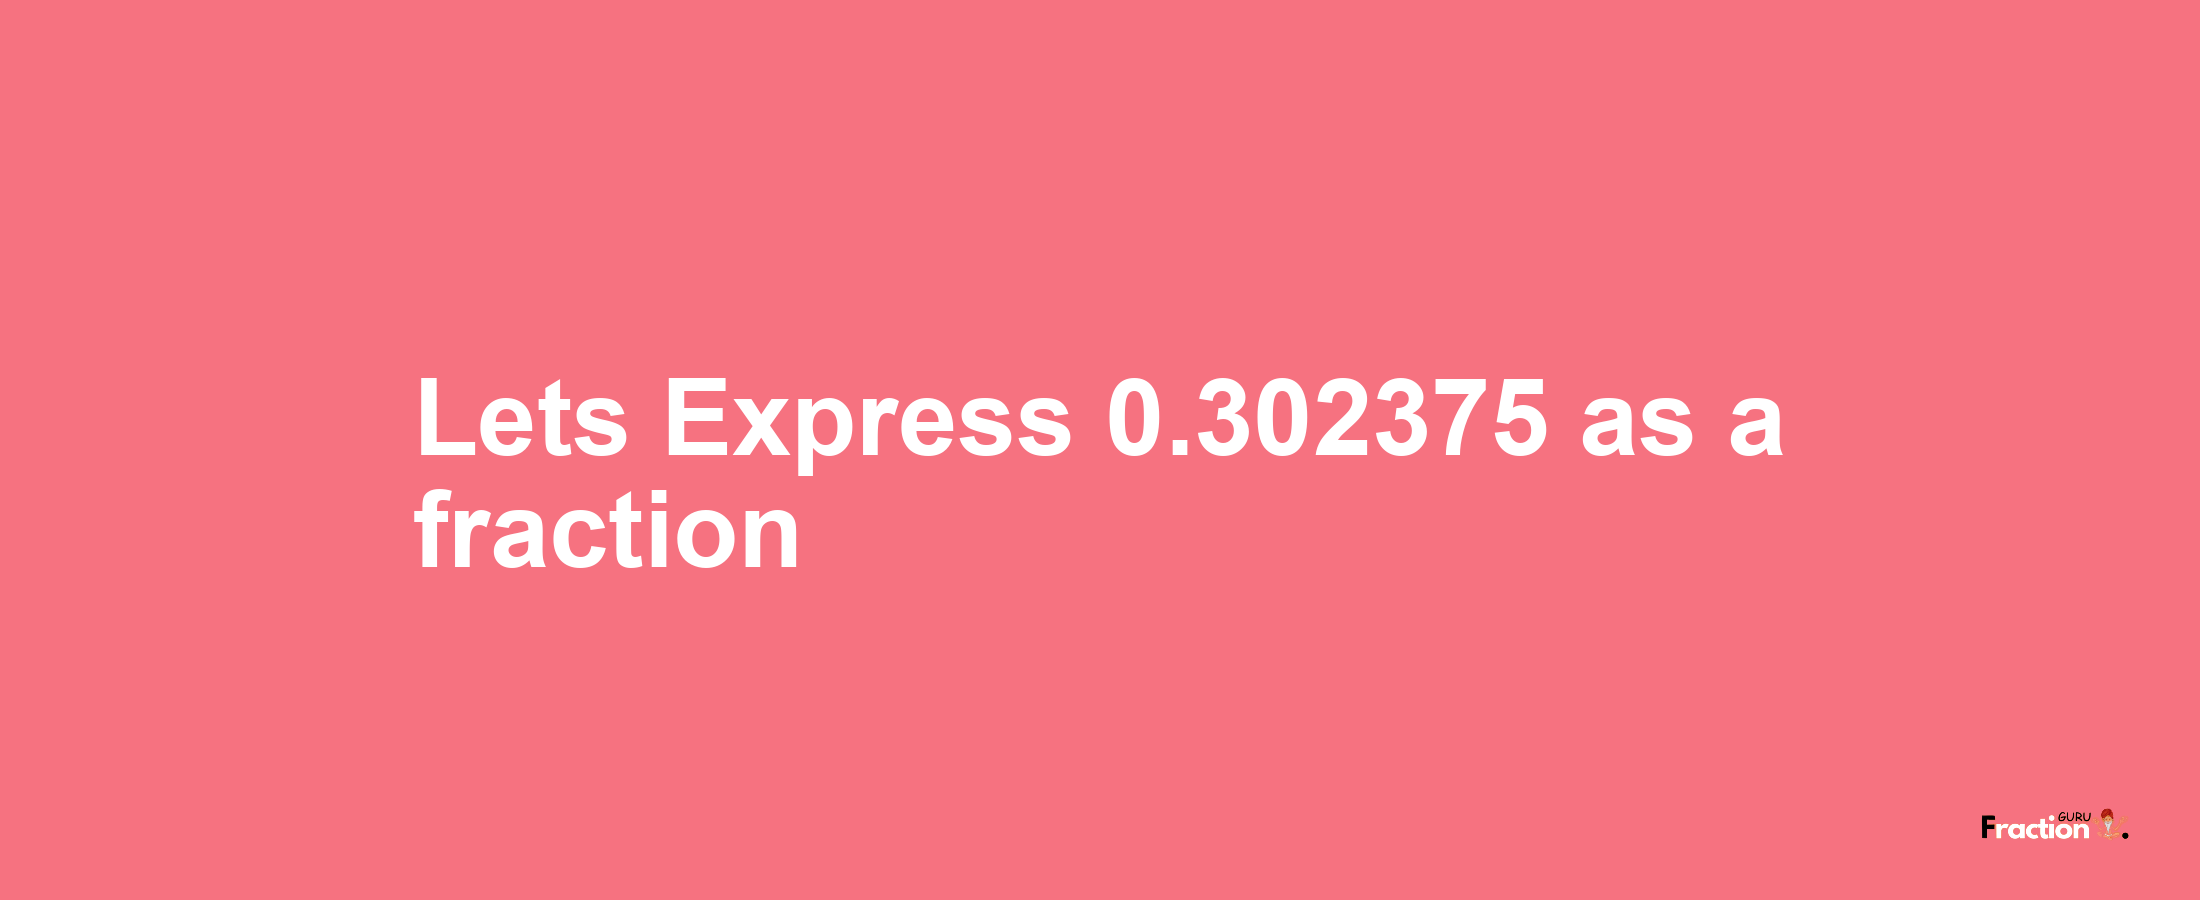 Lets Express 0.302375 as afraction